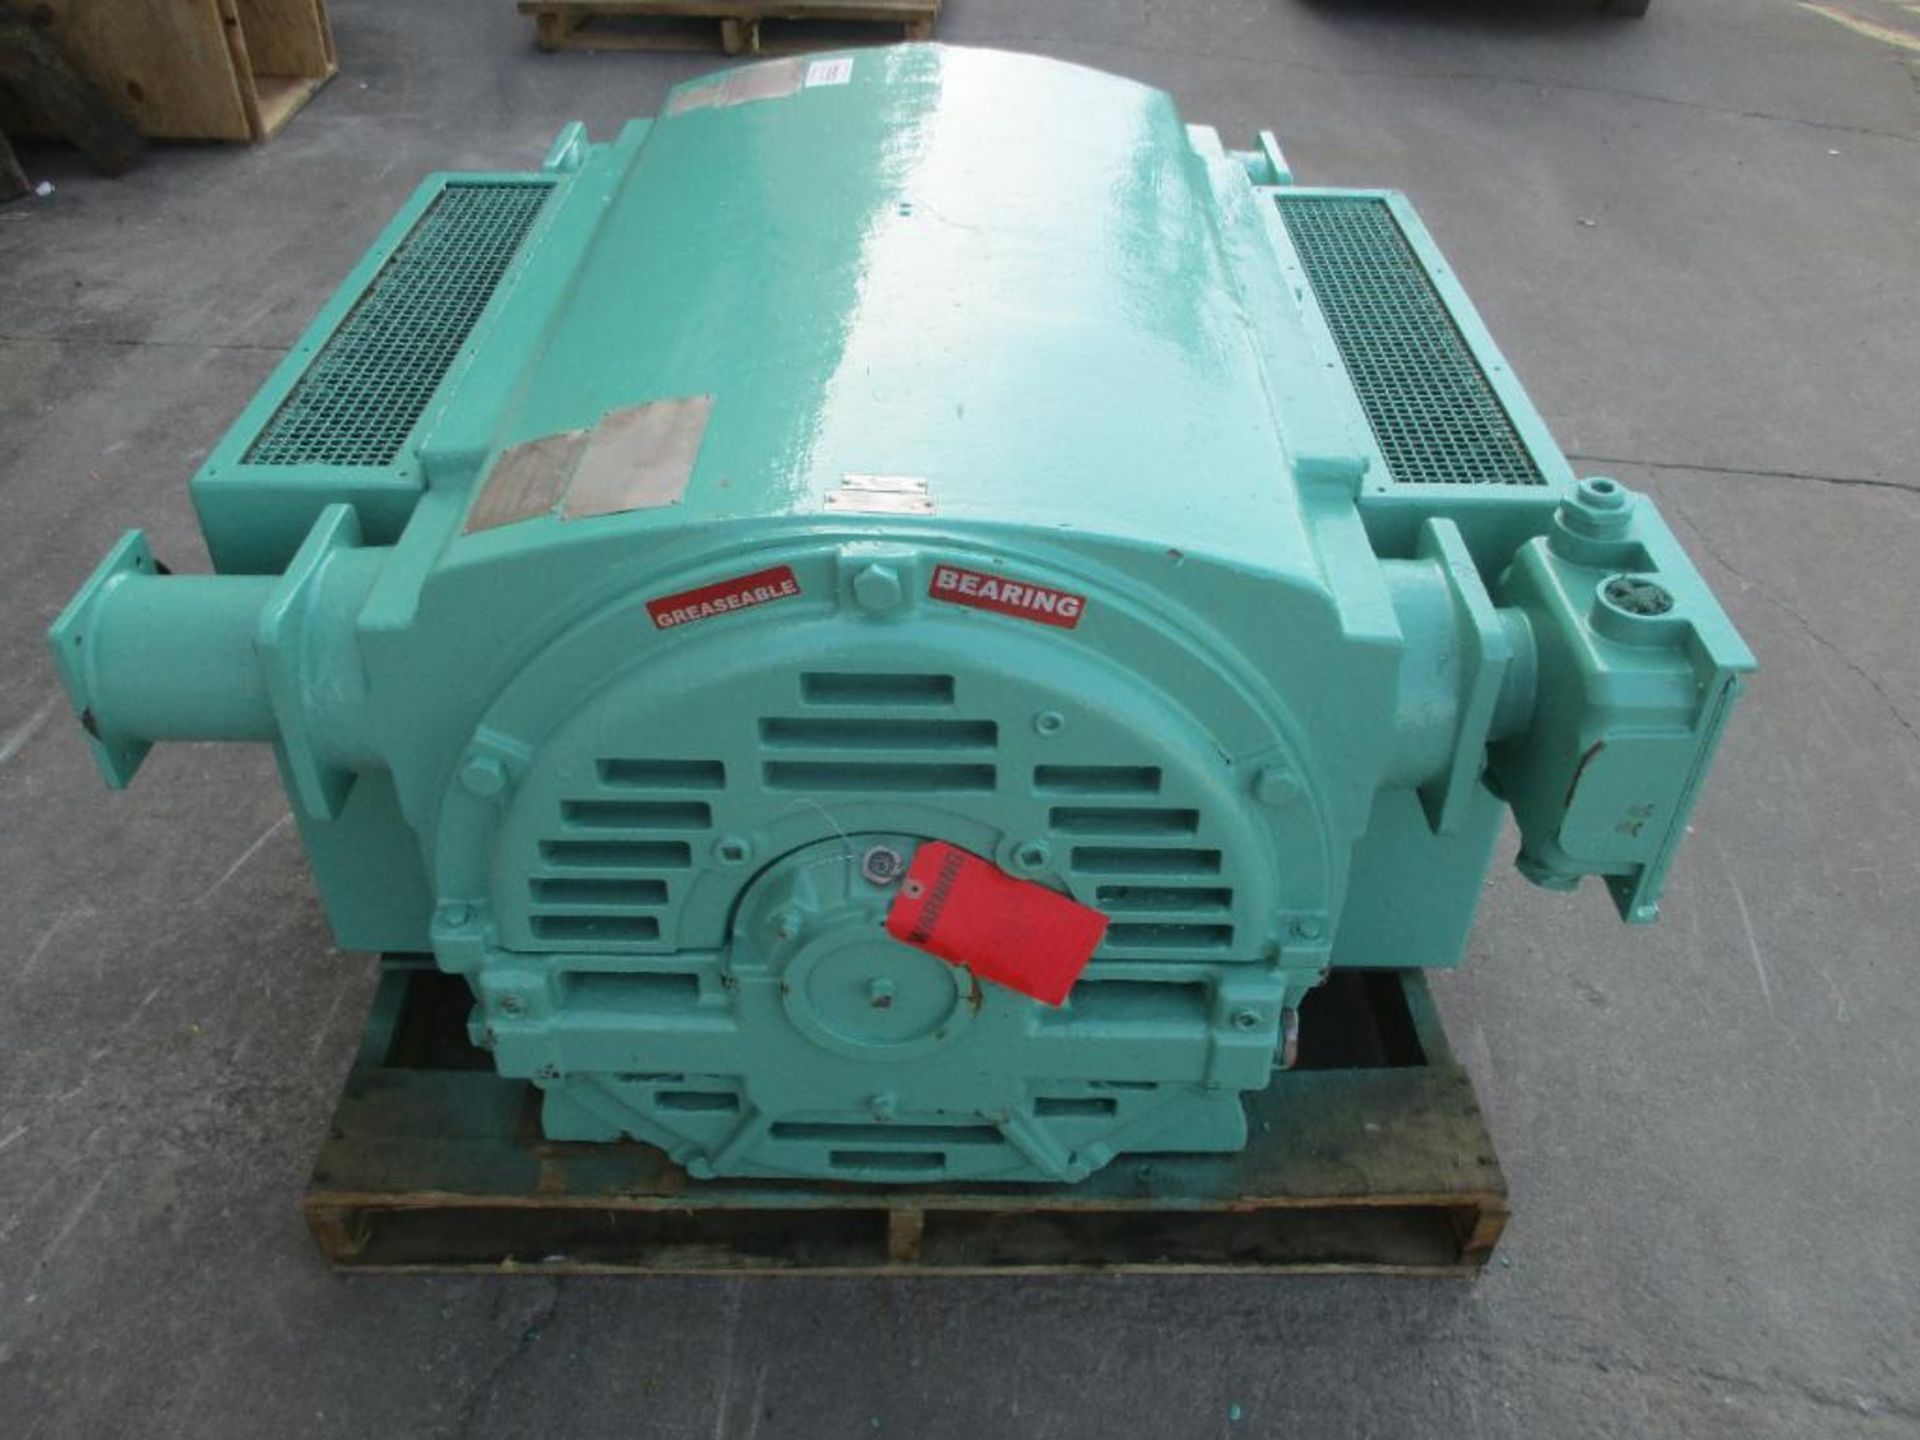 SIEMENS 3 PHASE 800HP 3563RPM 5010S FRAME A/C MOTOR P/N 1796567-13316 (THIS LOT IS FOB KNOXVILLE TN) - Image 4 of 5